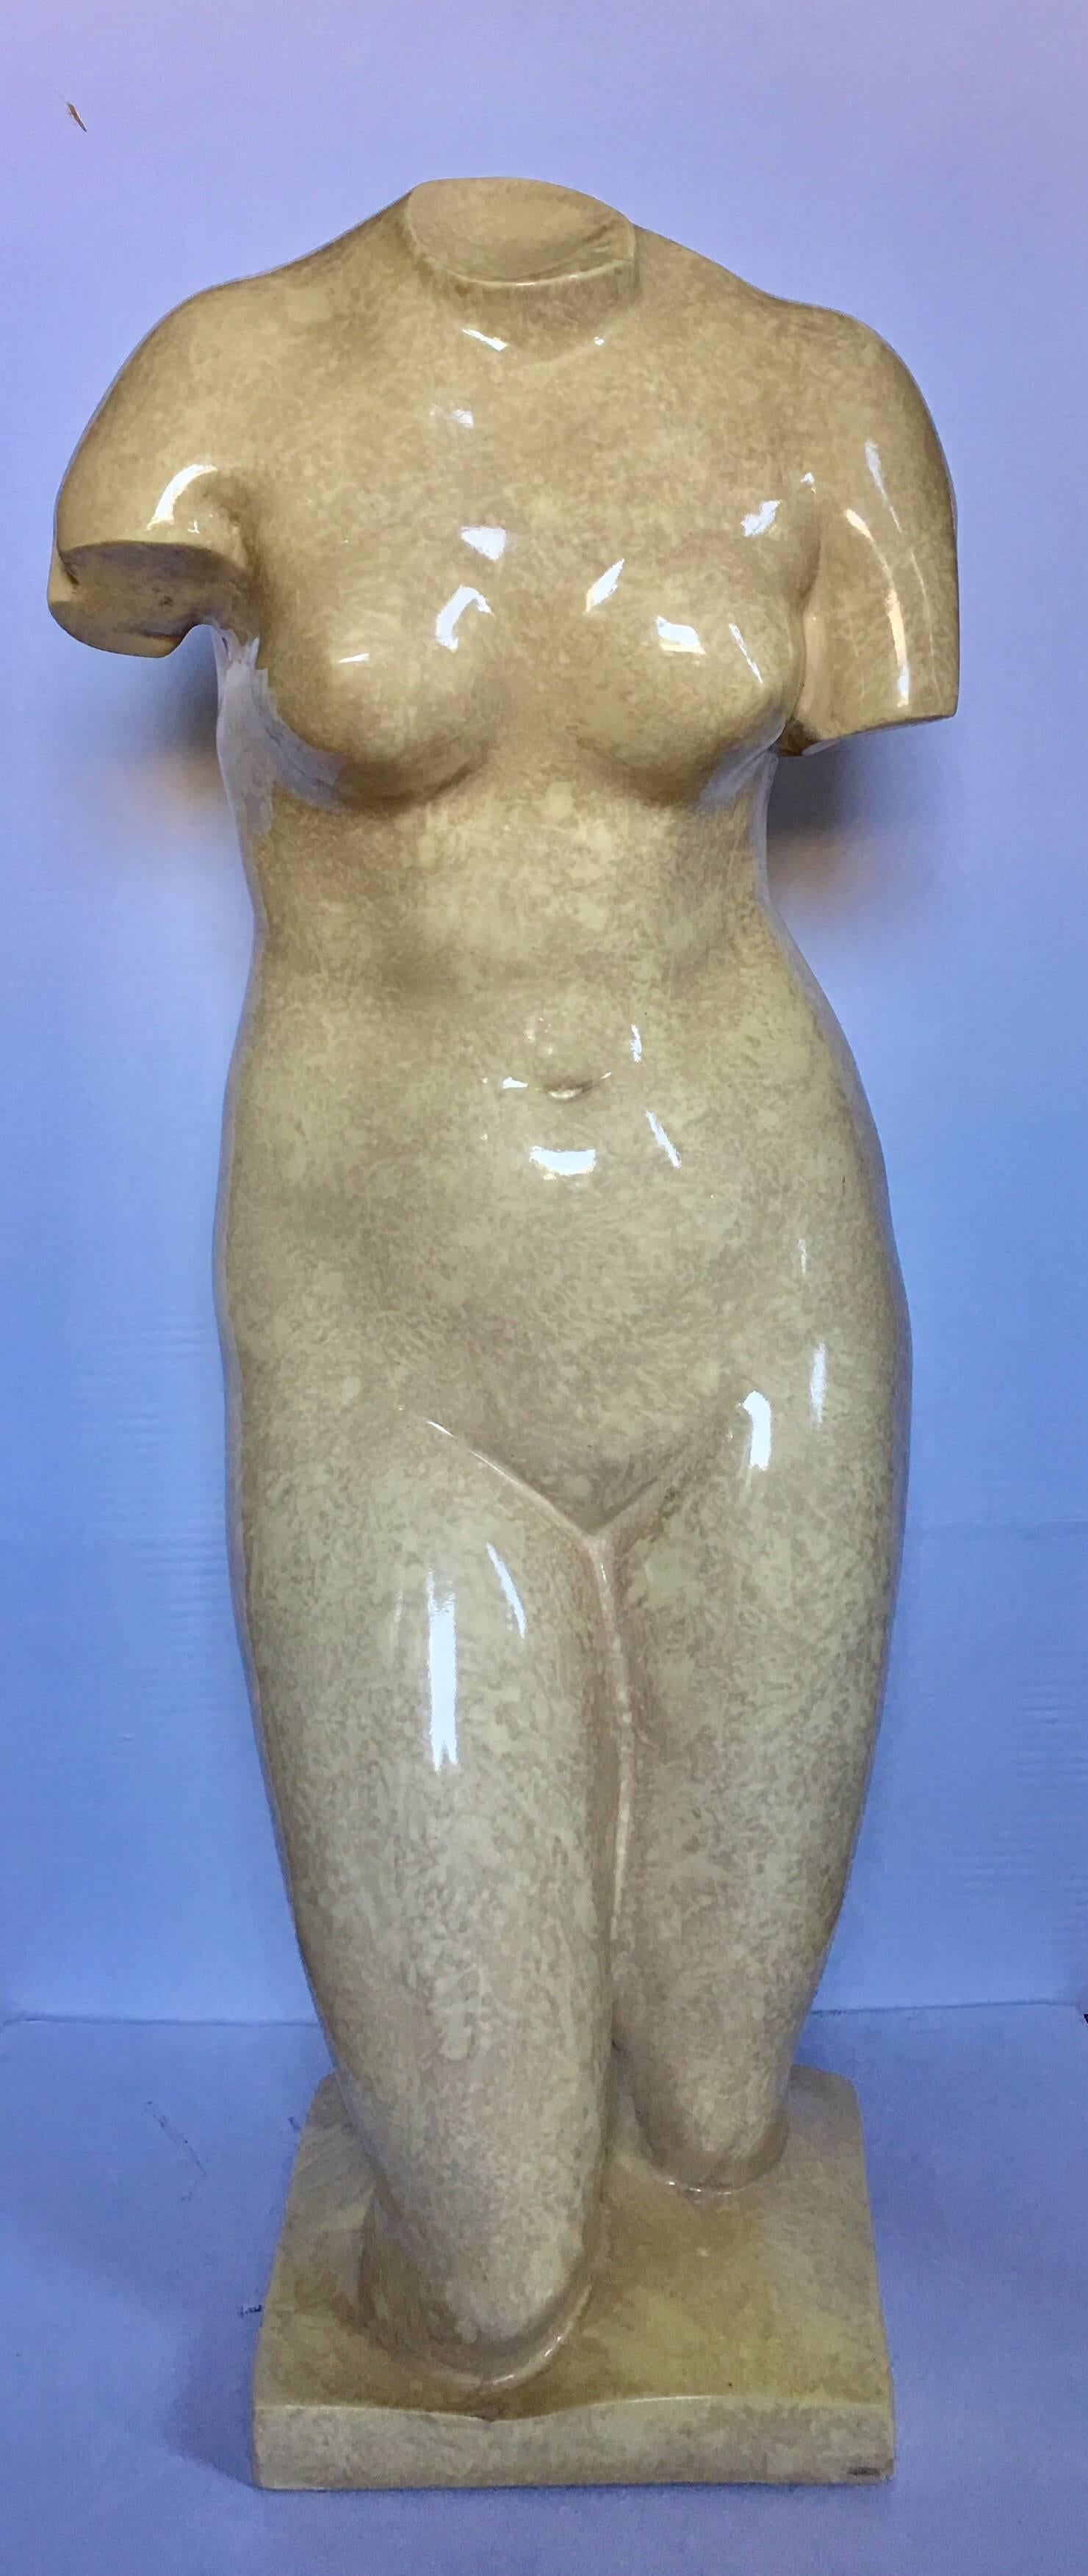 Dramatic scaled Mid-Century Modern classically inspired nude female torso bust floor statue. Plaster mold features a hand applied high gloss lacquered marble or stone like finish in neutral tan/beige tones.